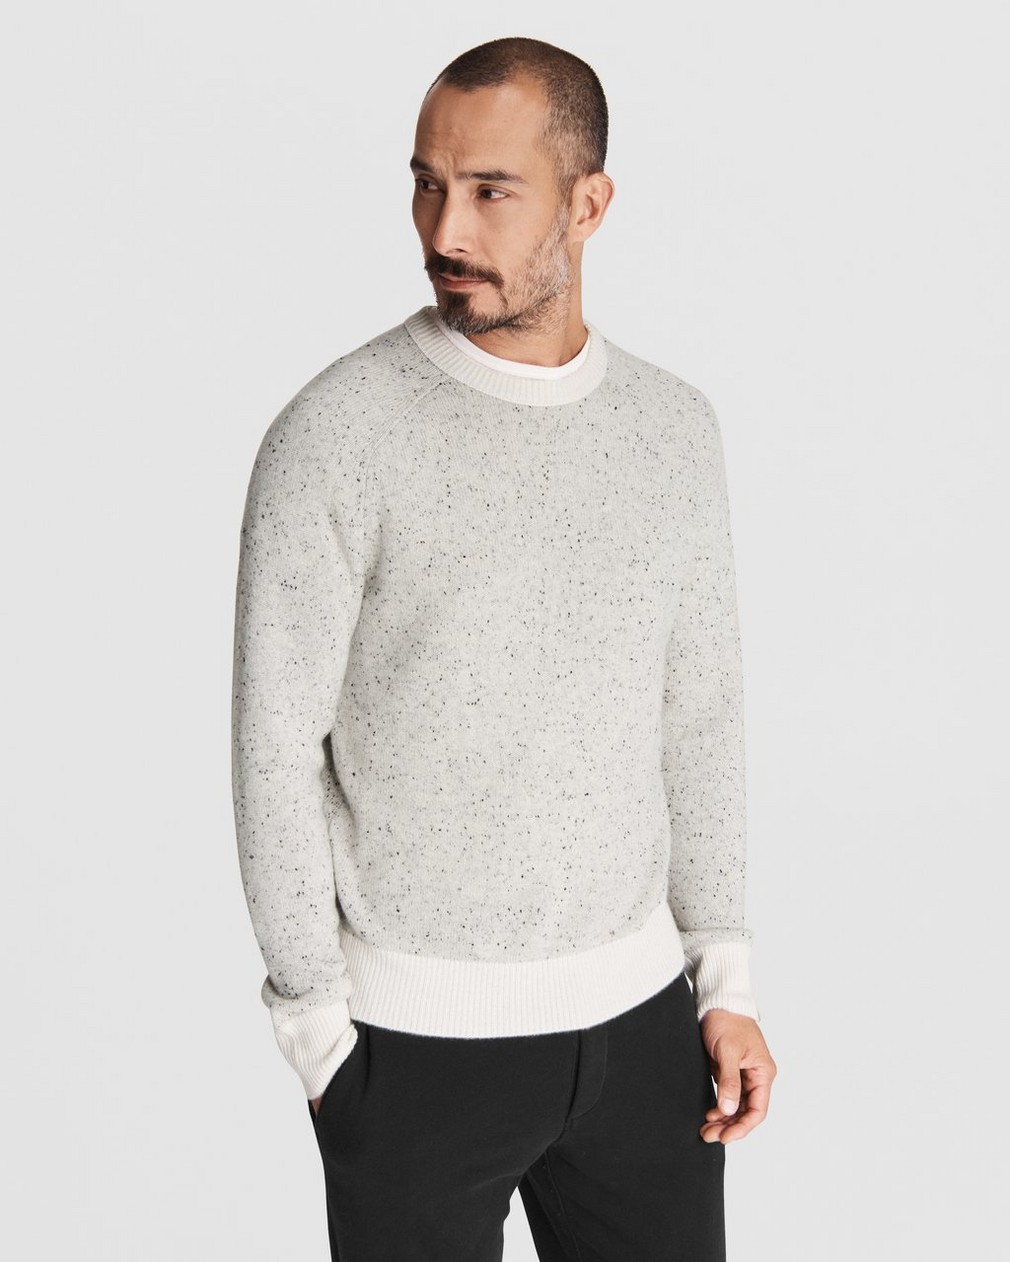 Harlow Donegal Cashmere Crew